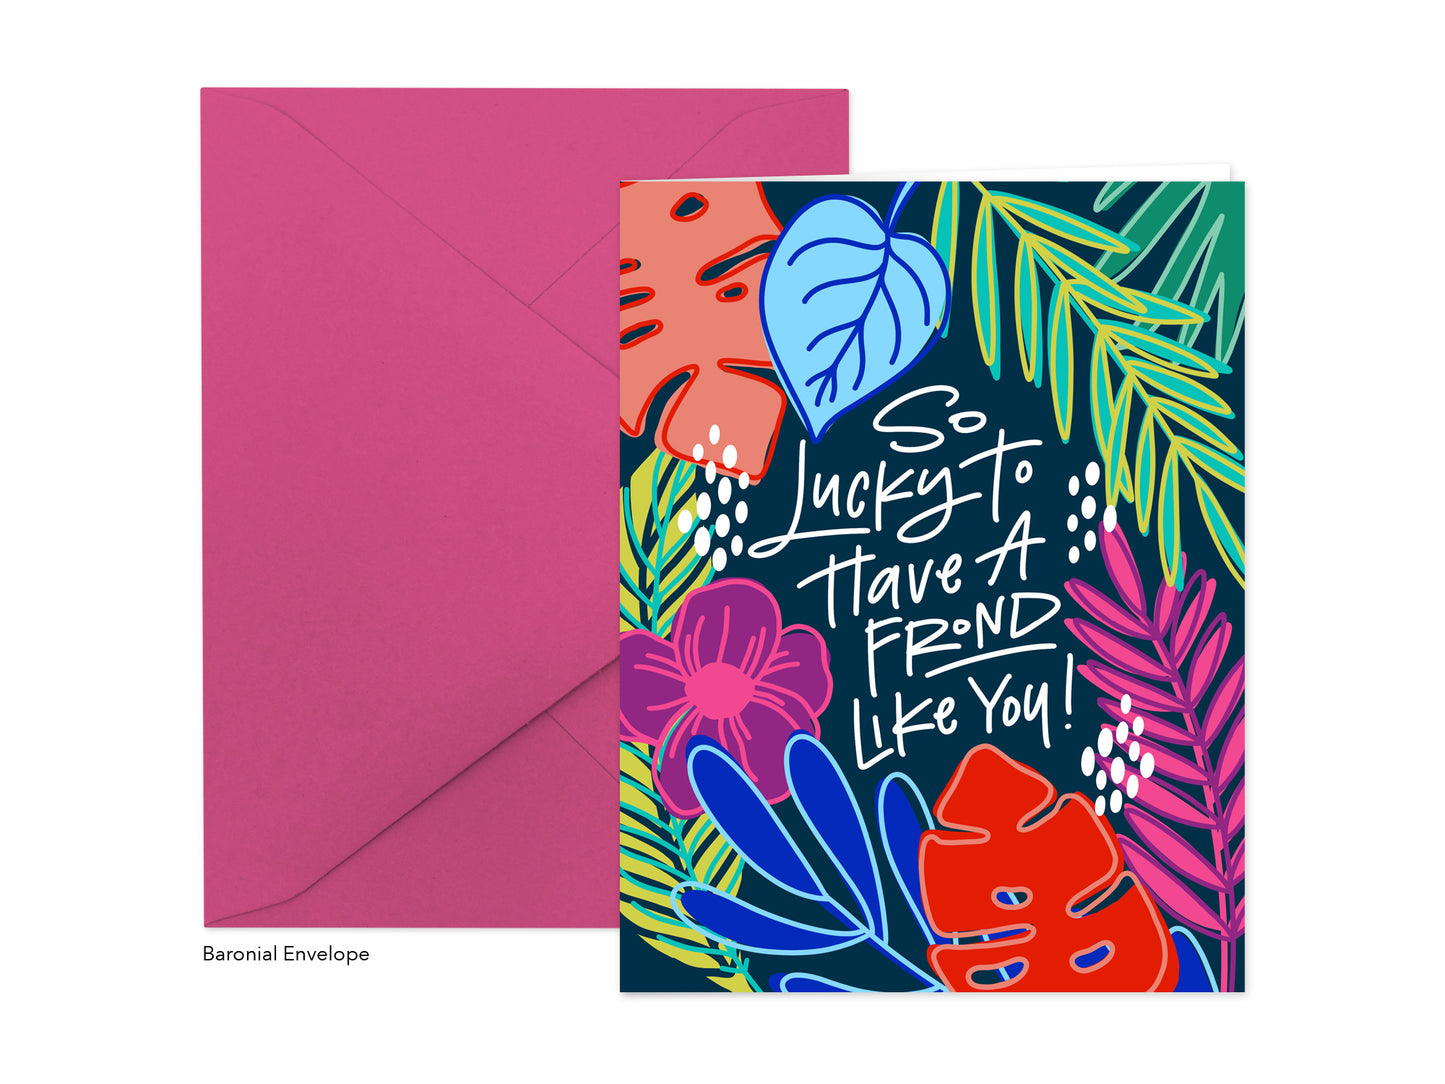 FROND LIKE YOU GREETING CARD.